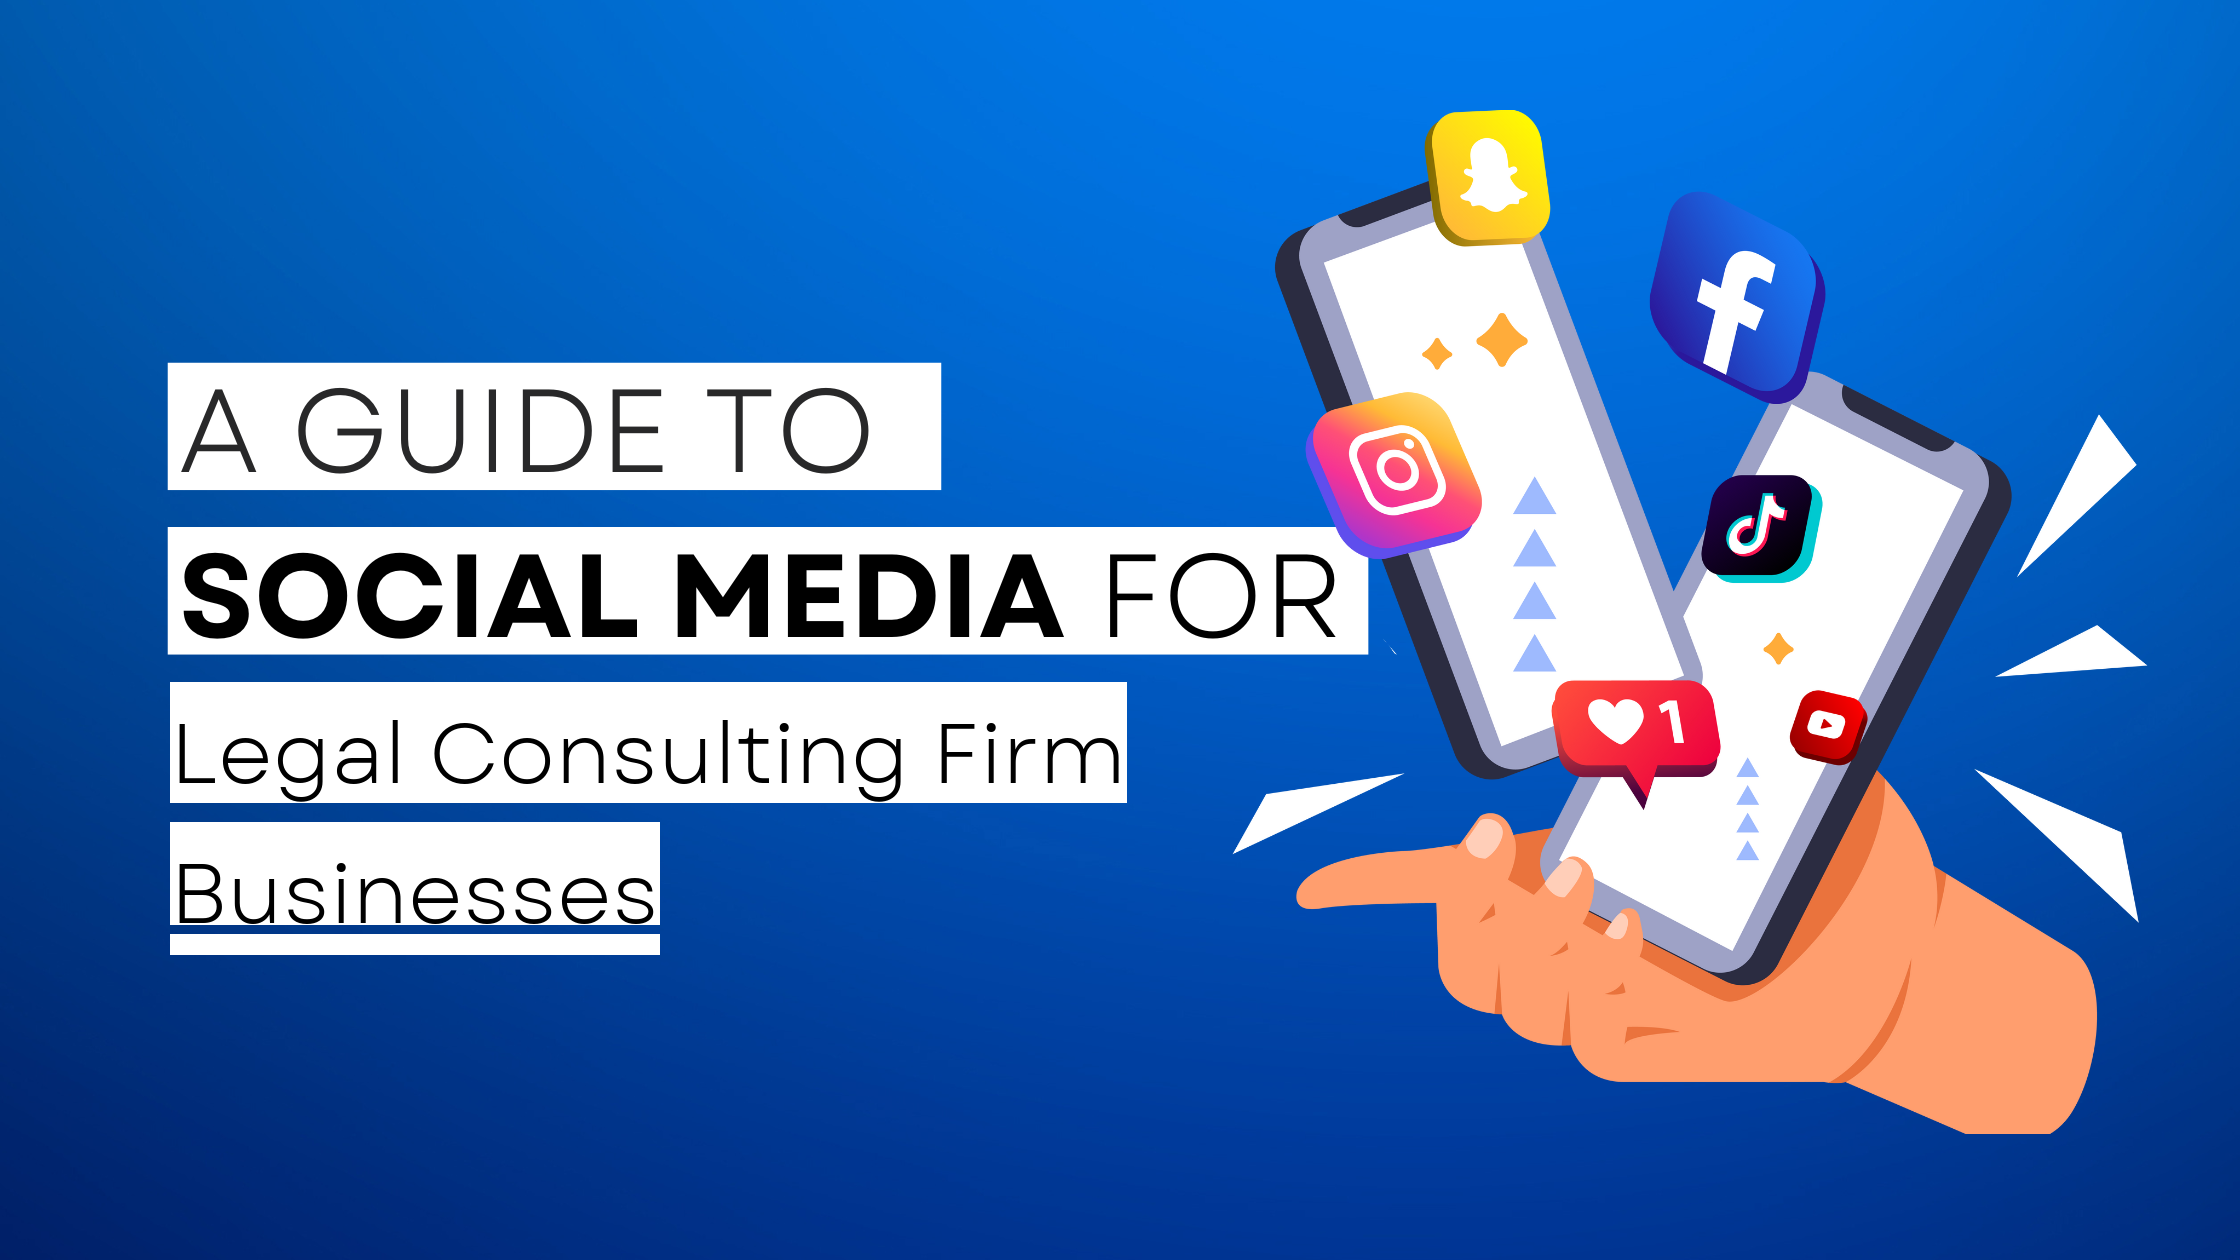 How to start Legal Consulting Firm on social media